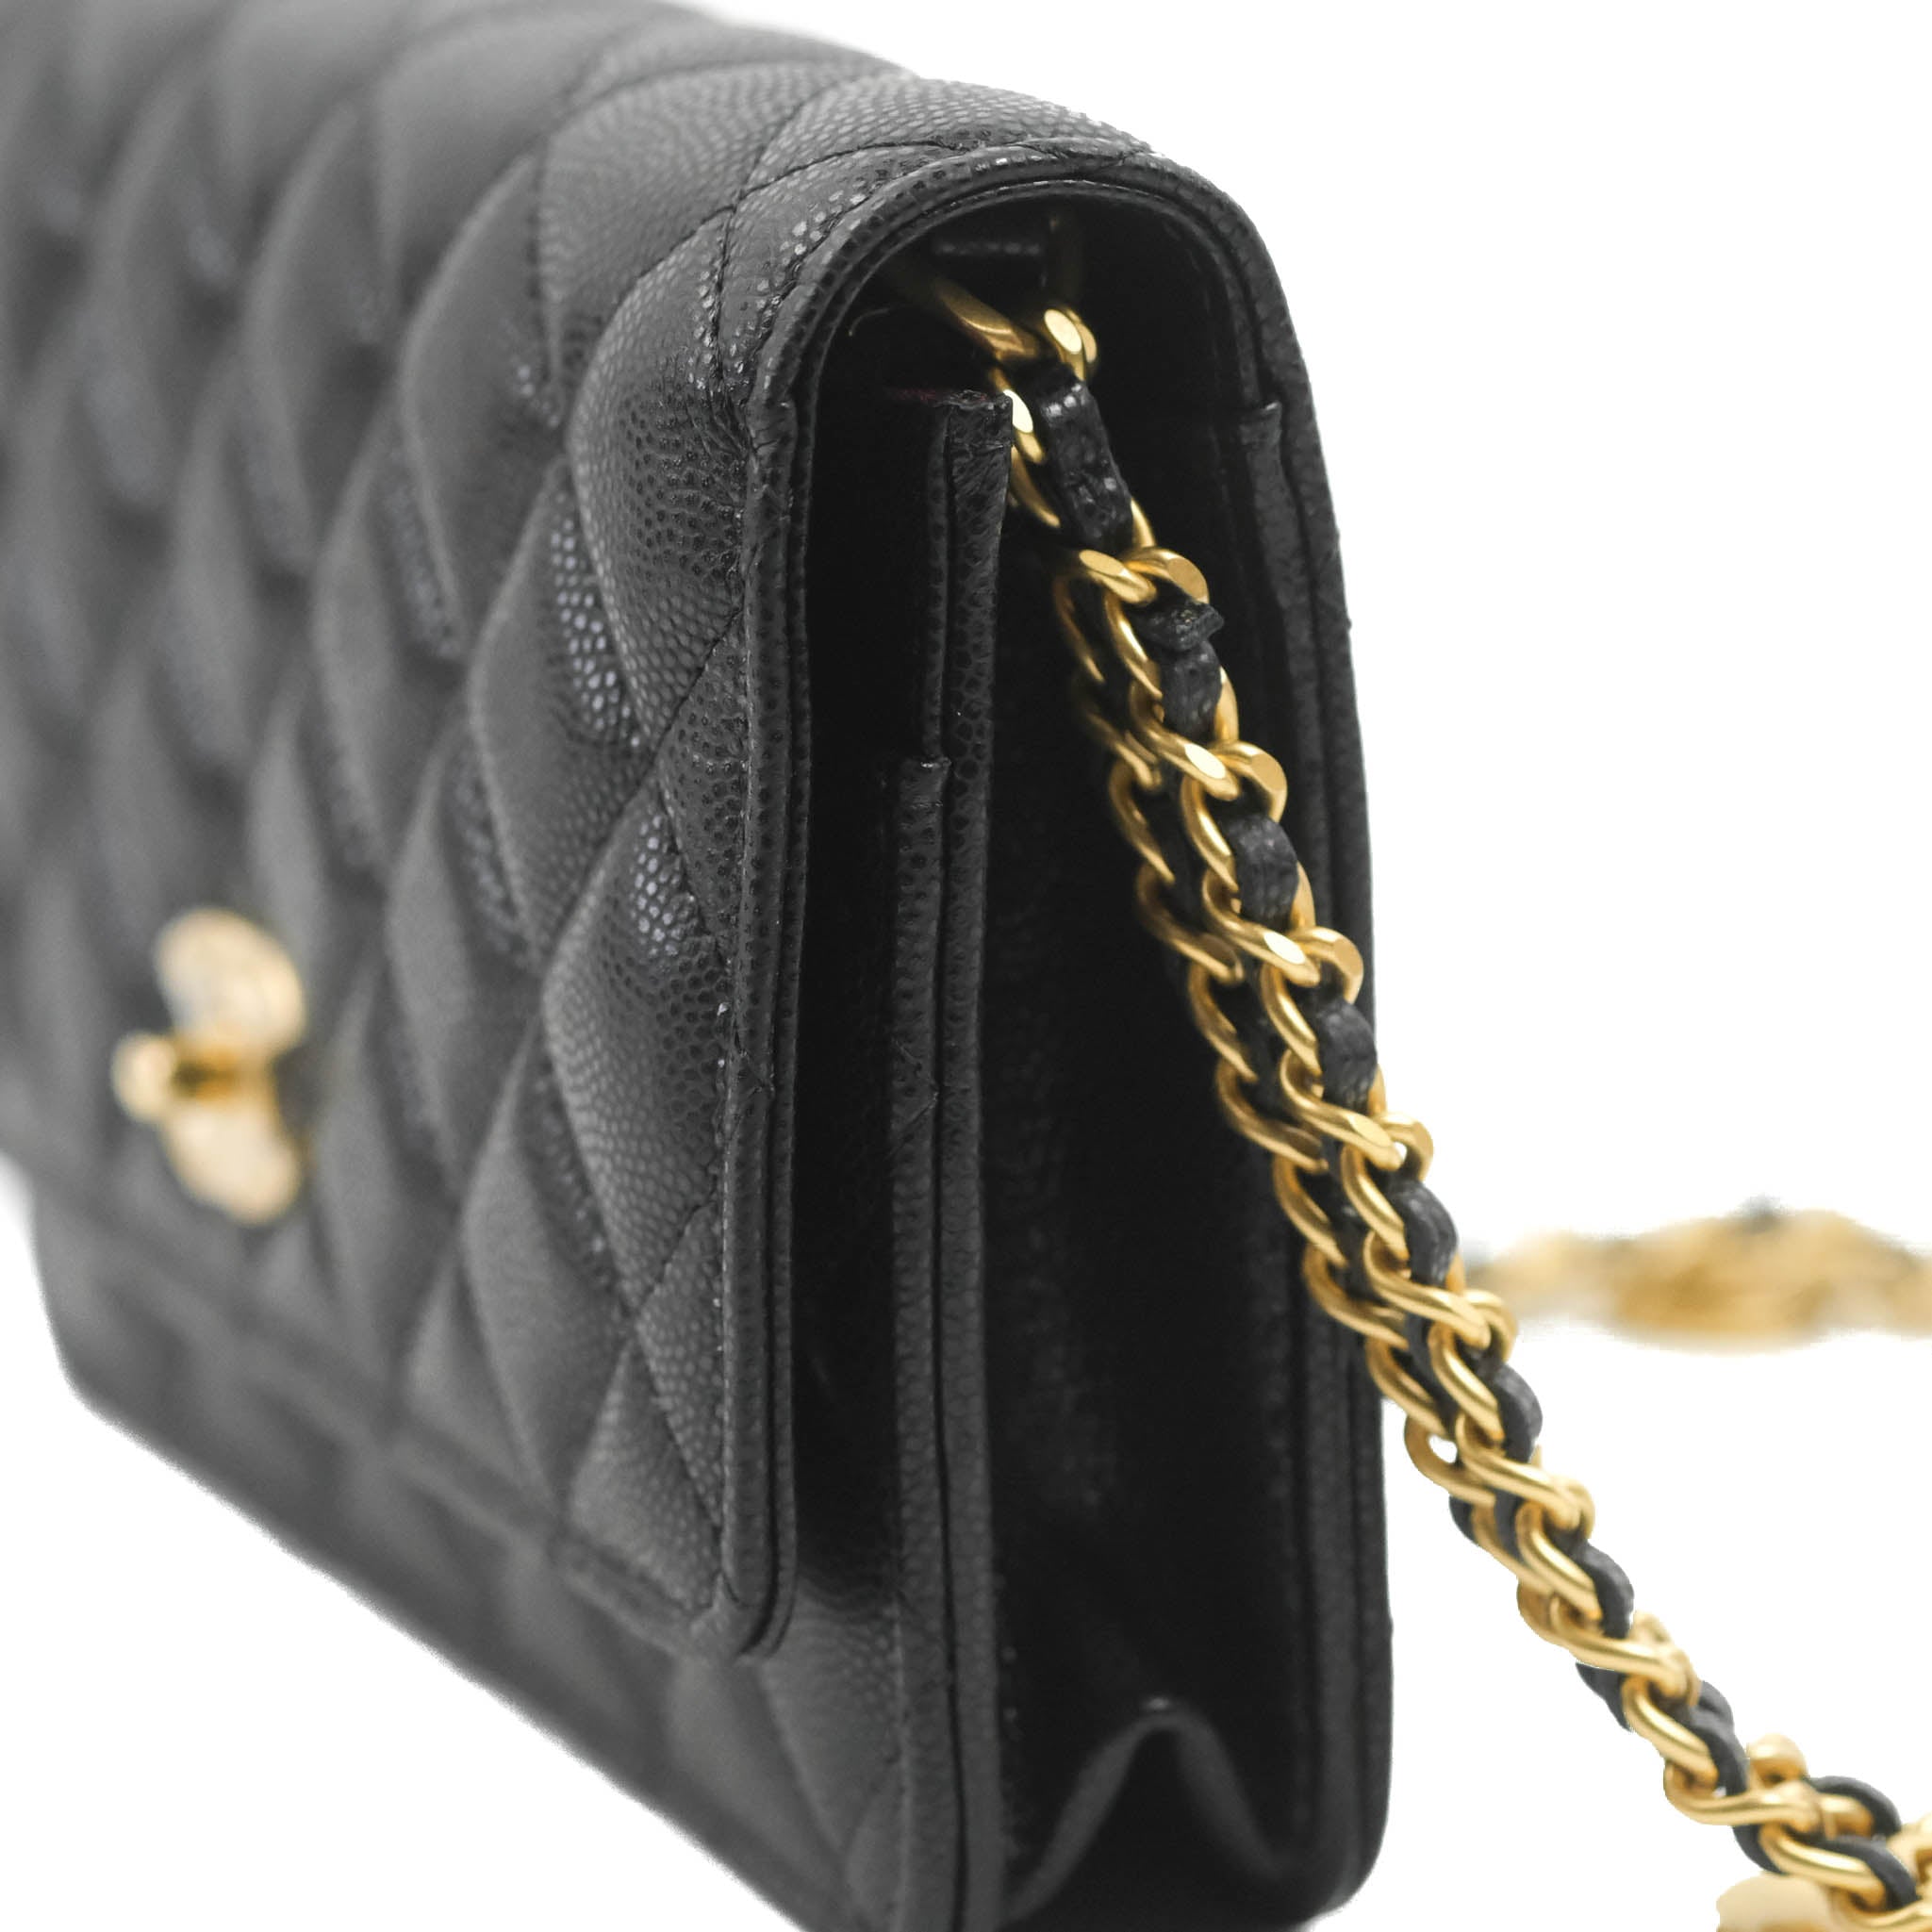 Chanel Filigree Wallet on Chain WOC Yellow Caviar Gold Hardware – Coco  Approved Studio